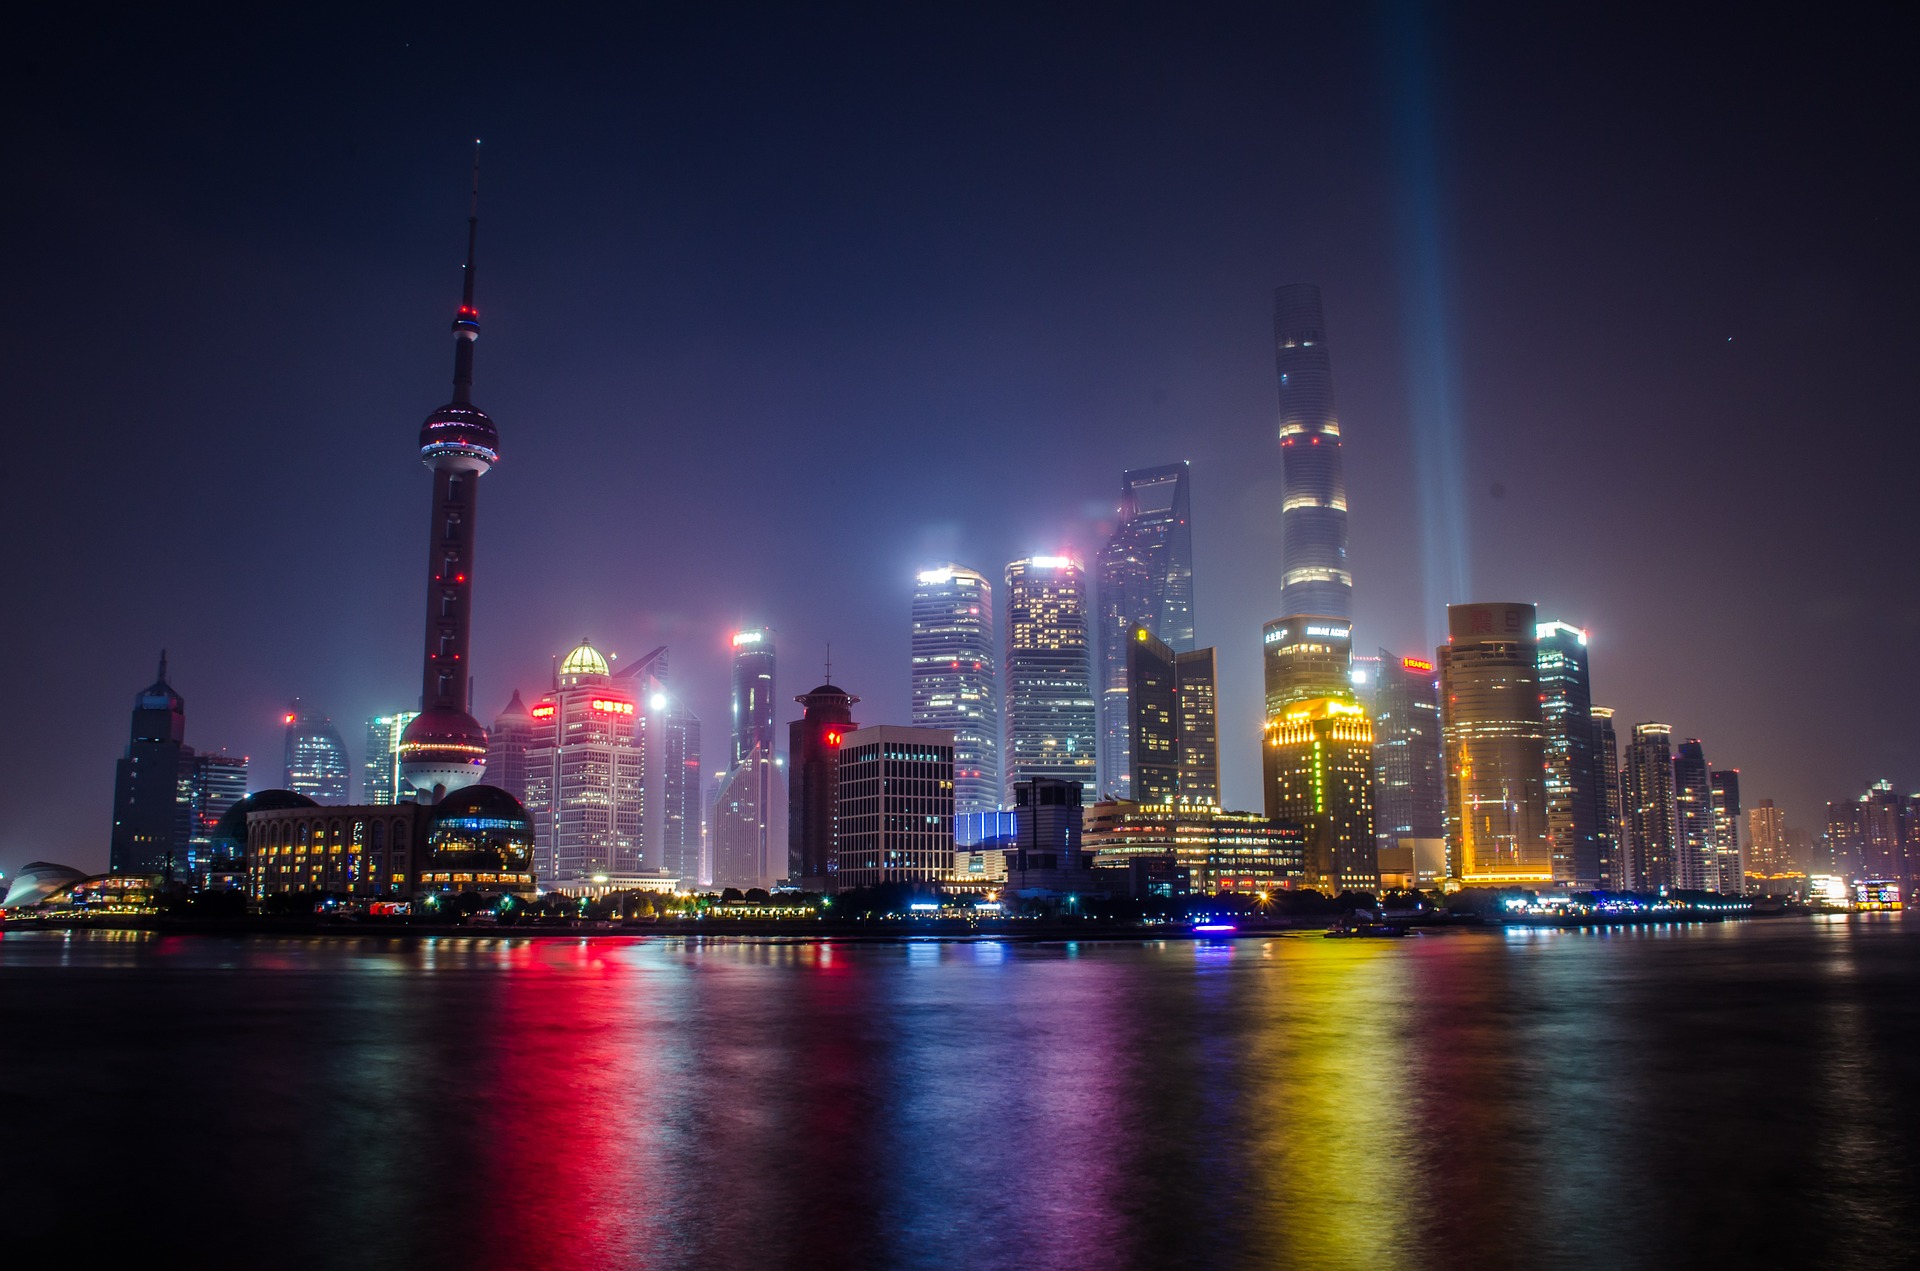 The Bund skyline with lights and a body of water